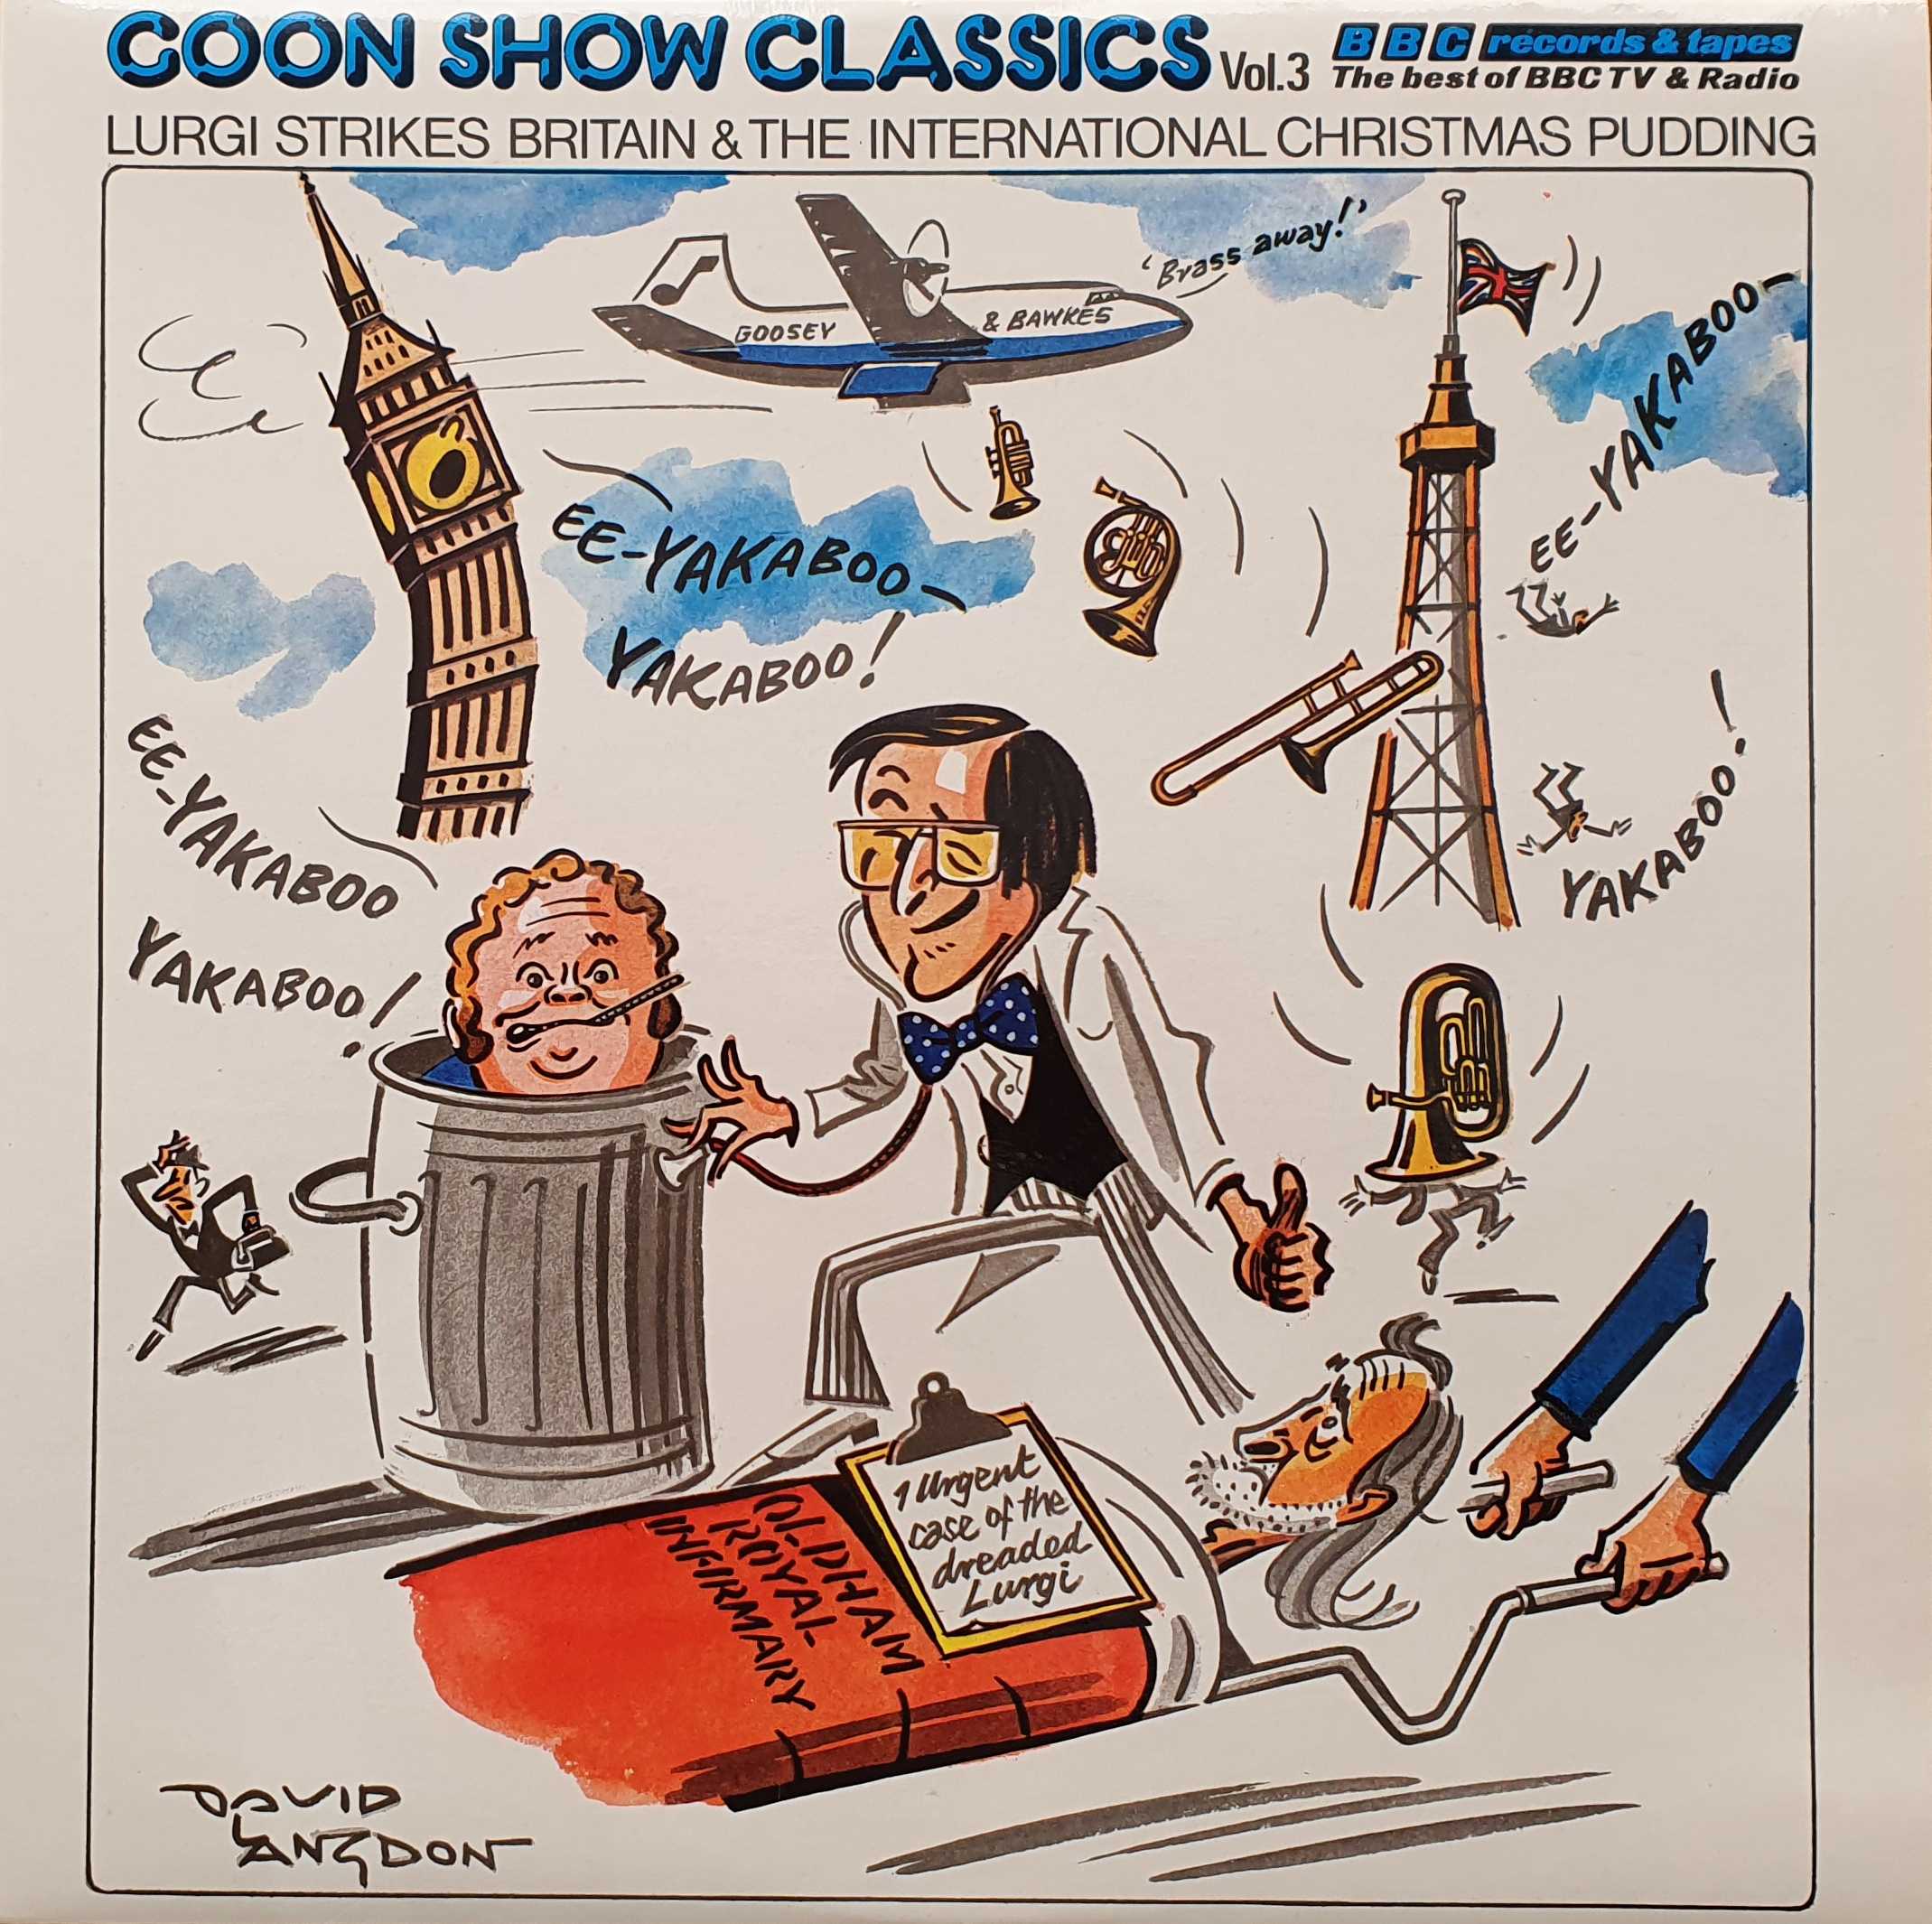 Picture of 2964 045 Goon Show classics vol. 3 by artist The Goon Show from the BBC albums - Records and Tapes library